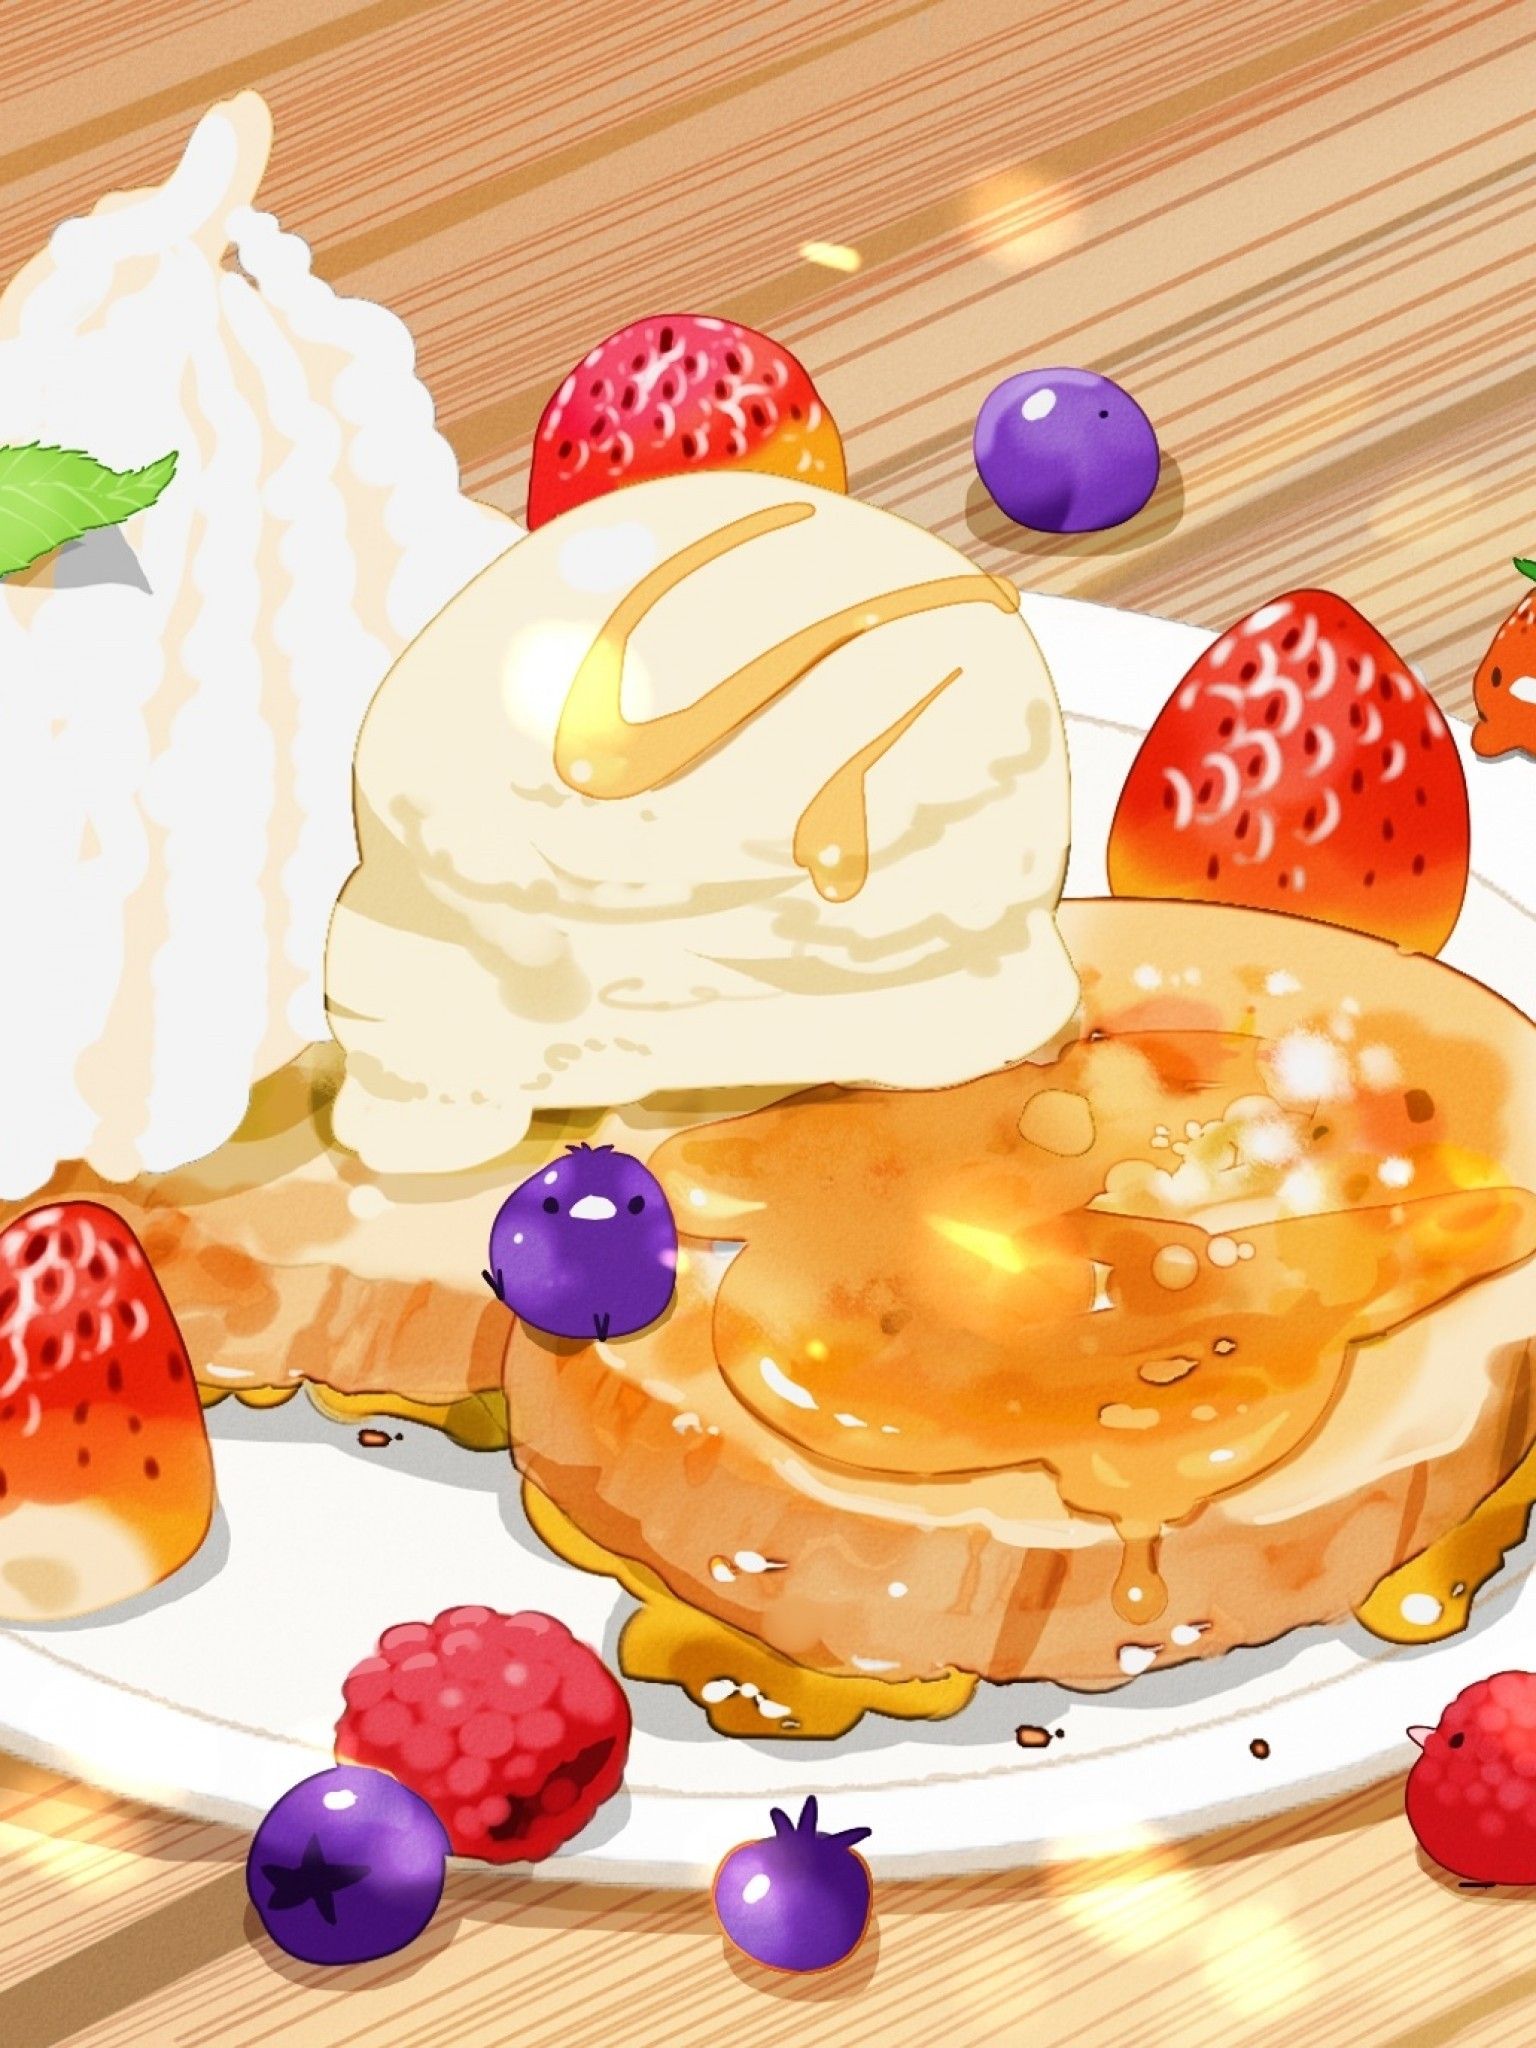 A plate of pancakes with fruit and ice cream - Cake